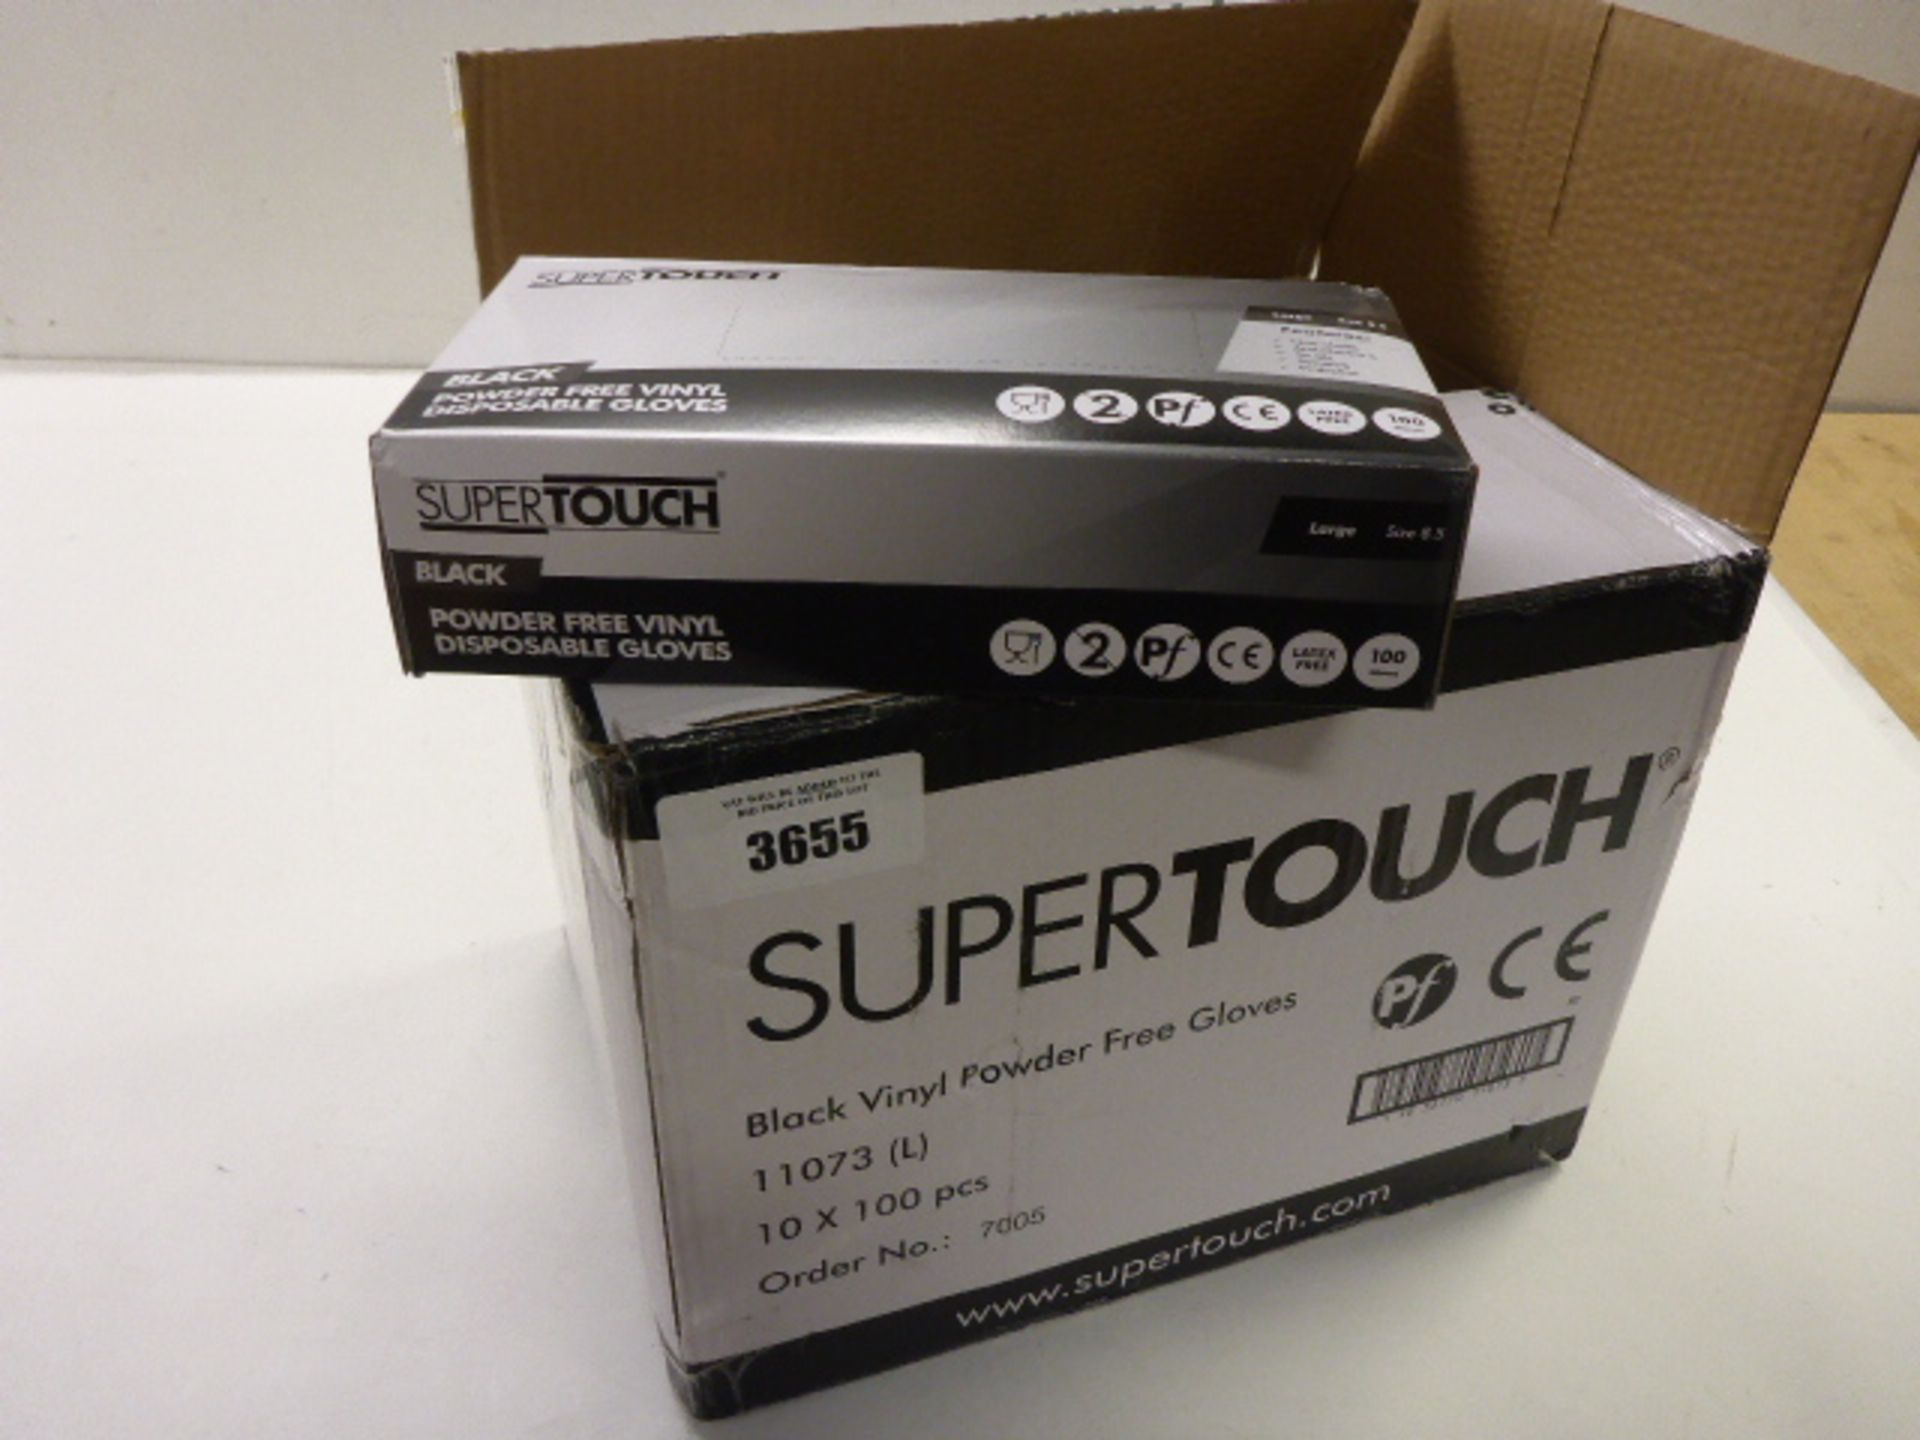 10 packs of 100 Super Touch black powder free disposable gloves